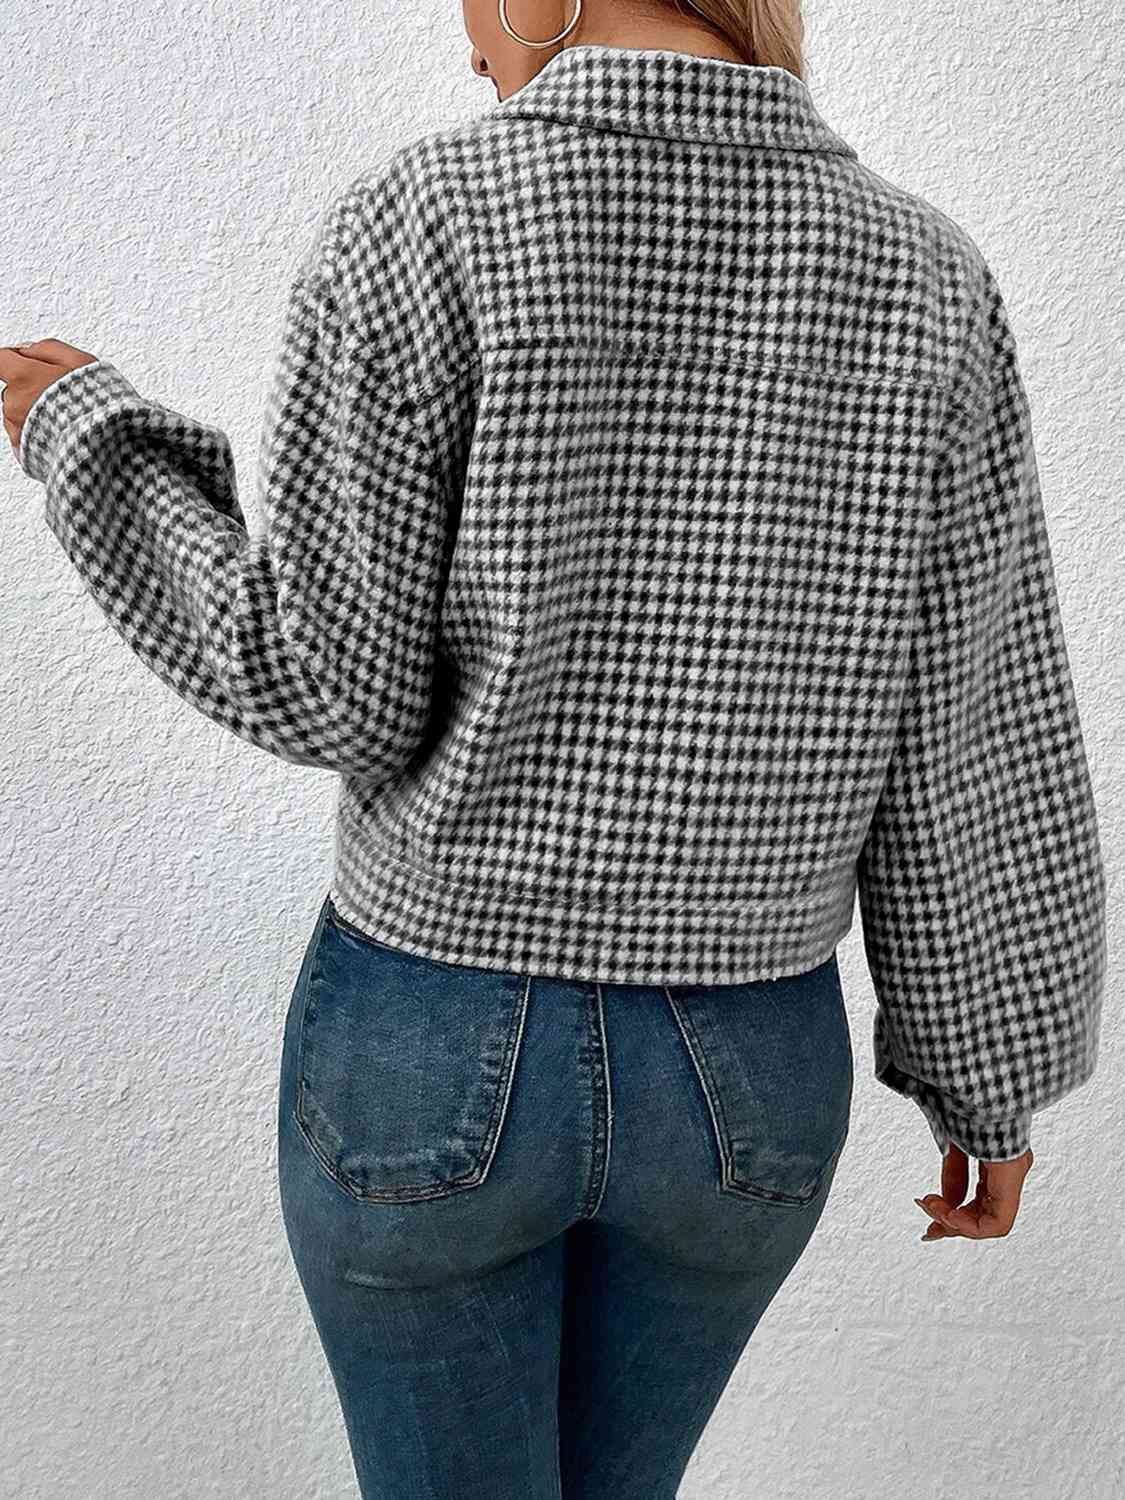 Plaid Print Collared Neck Button Up Jacket